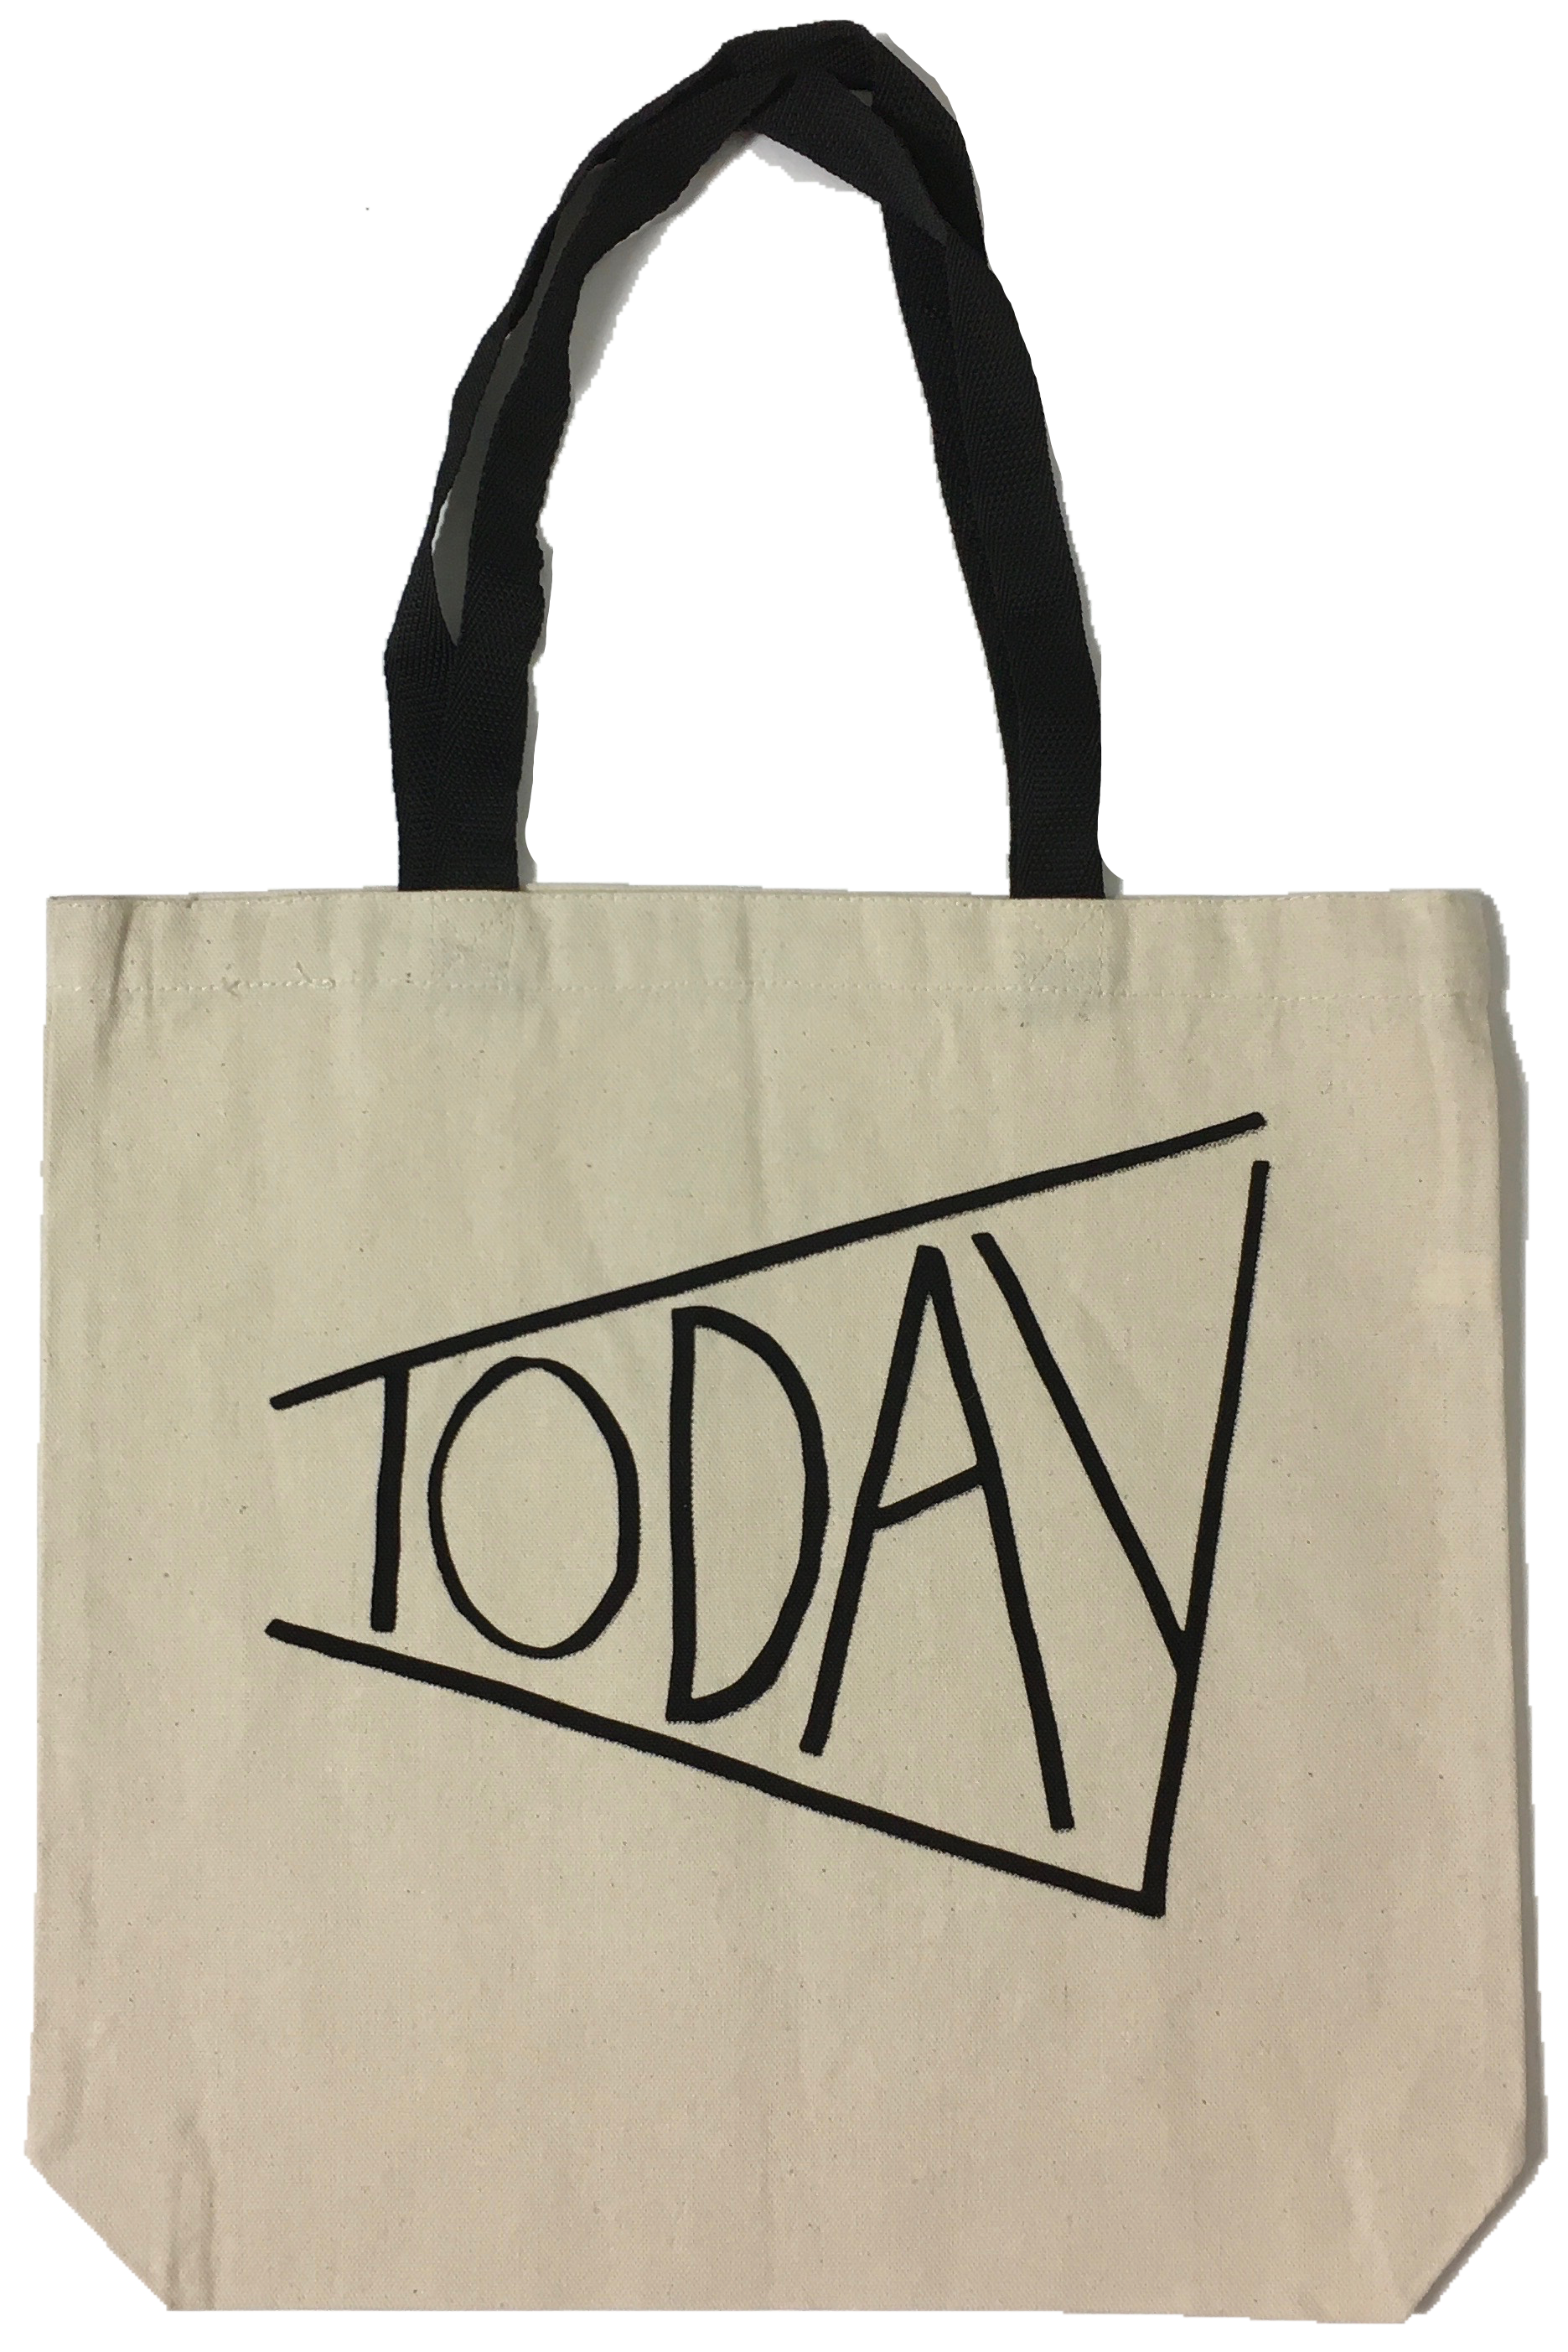 today tote bag